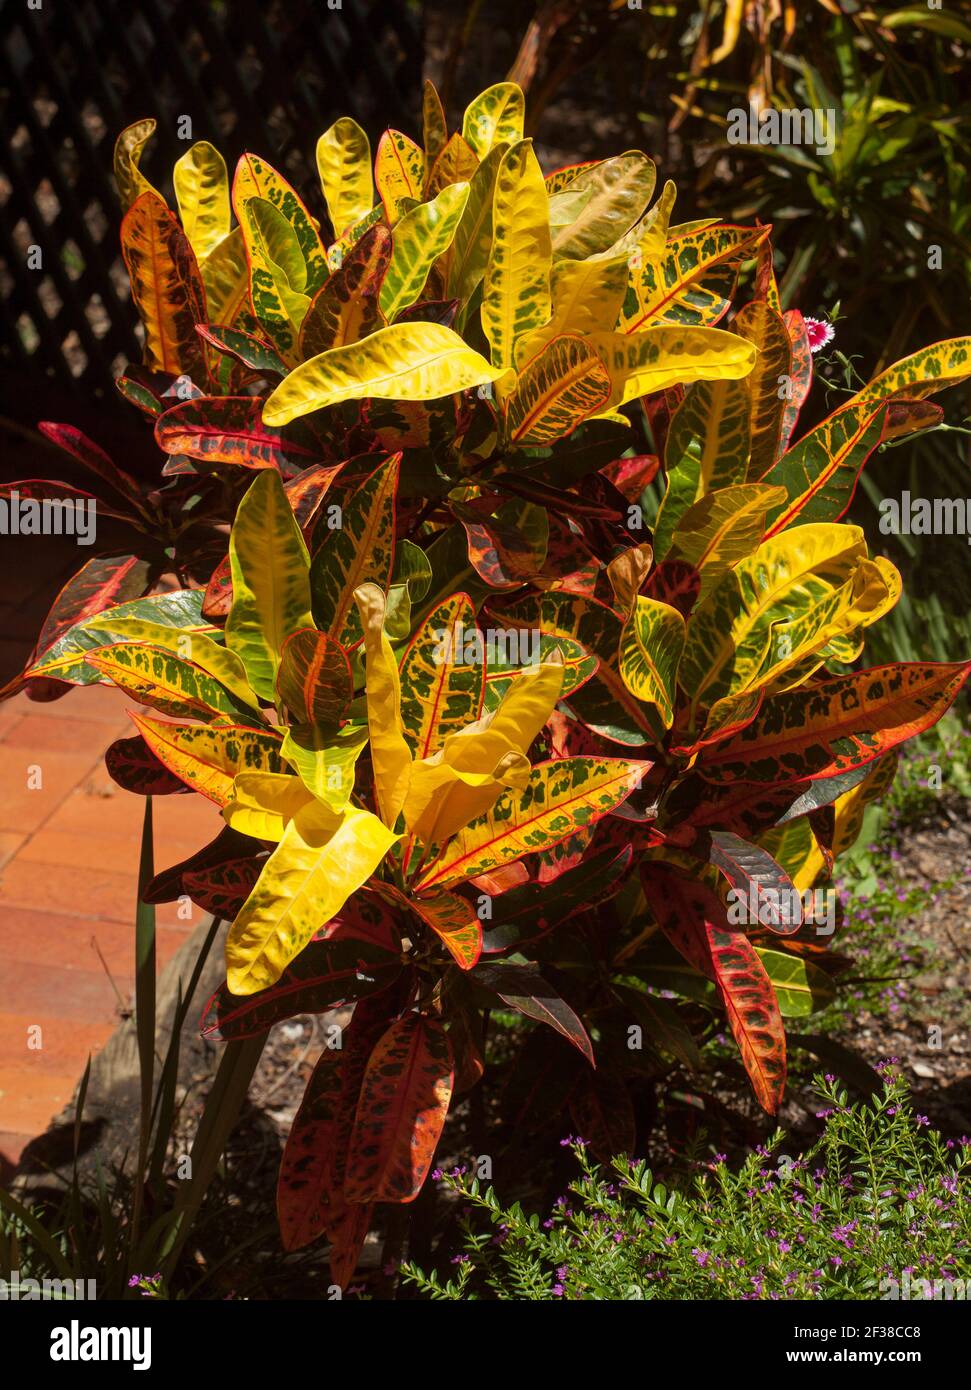 Croton, Codiaeum variegatum, an evergreen shrub with colourful red, yellow and green variegated foliage Stock Photo